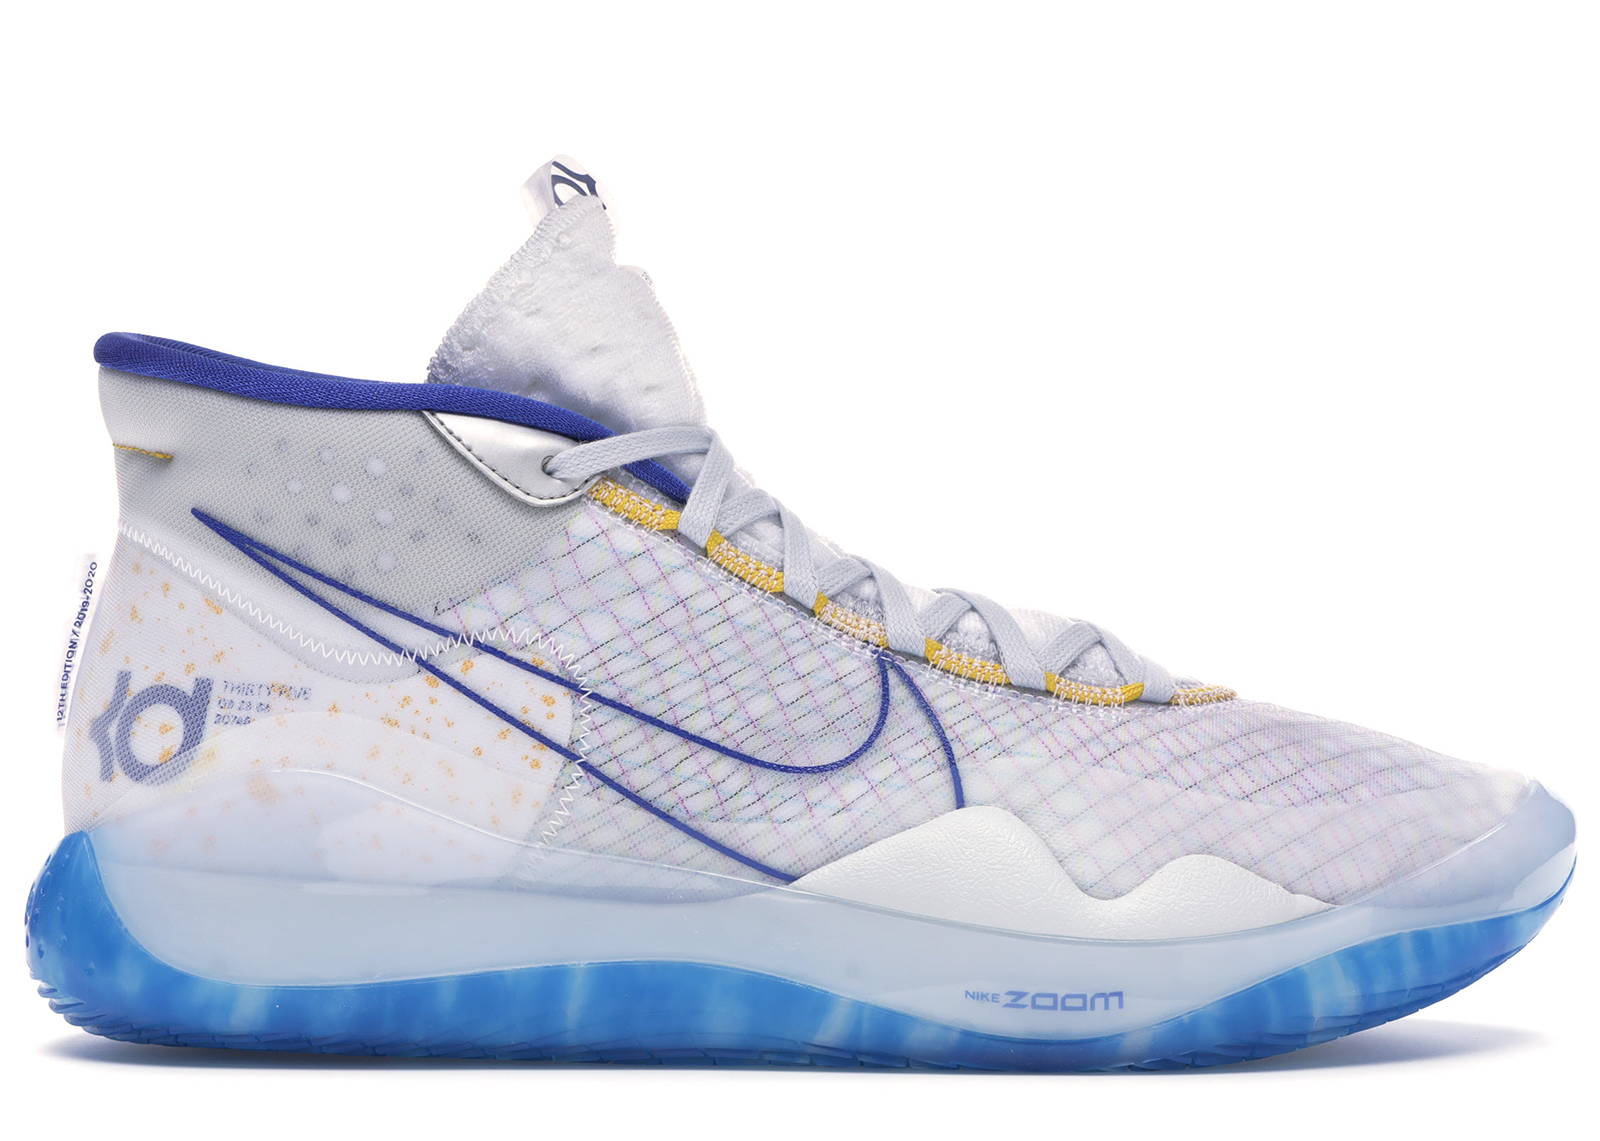 kd warriors shoes